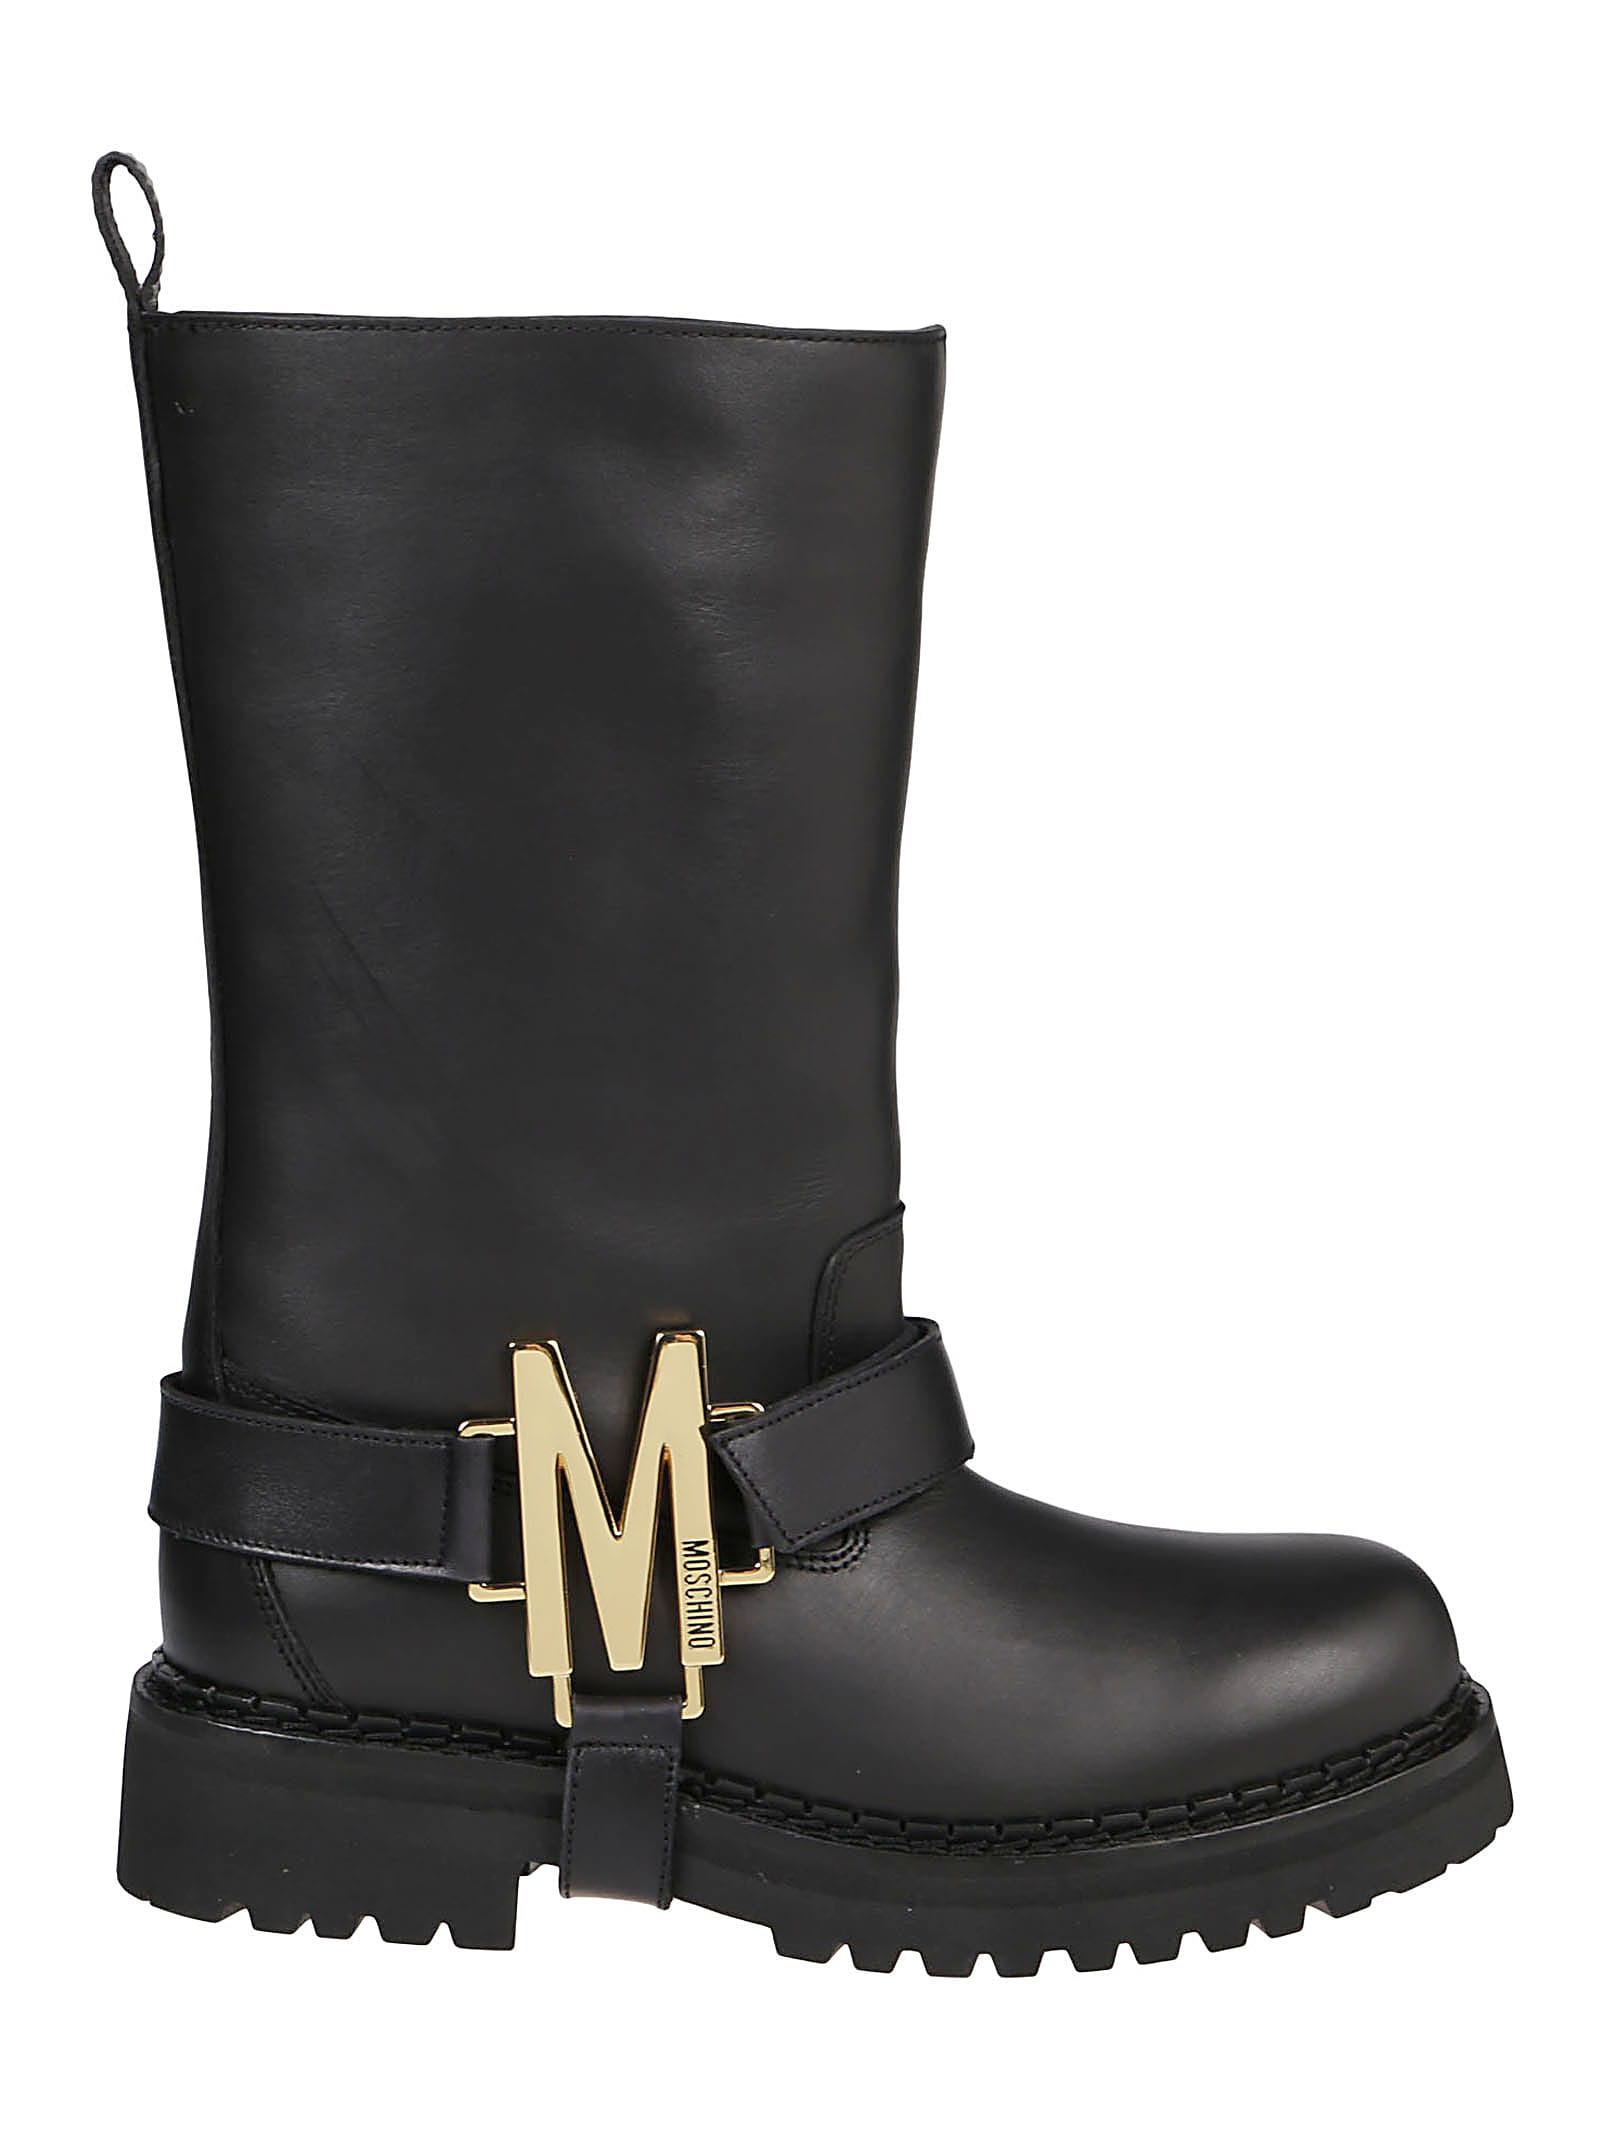 Buy Moschino Boots Montagna50 online, shop Moschino shoes with free shipping